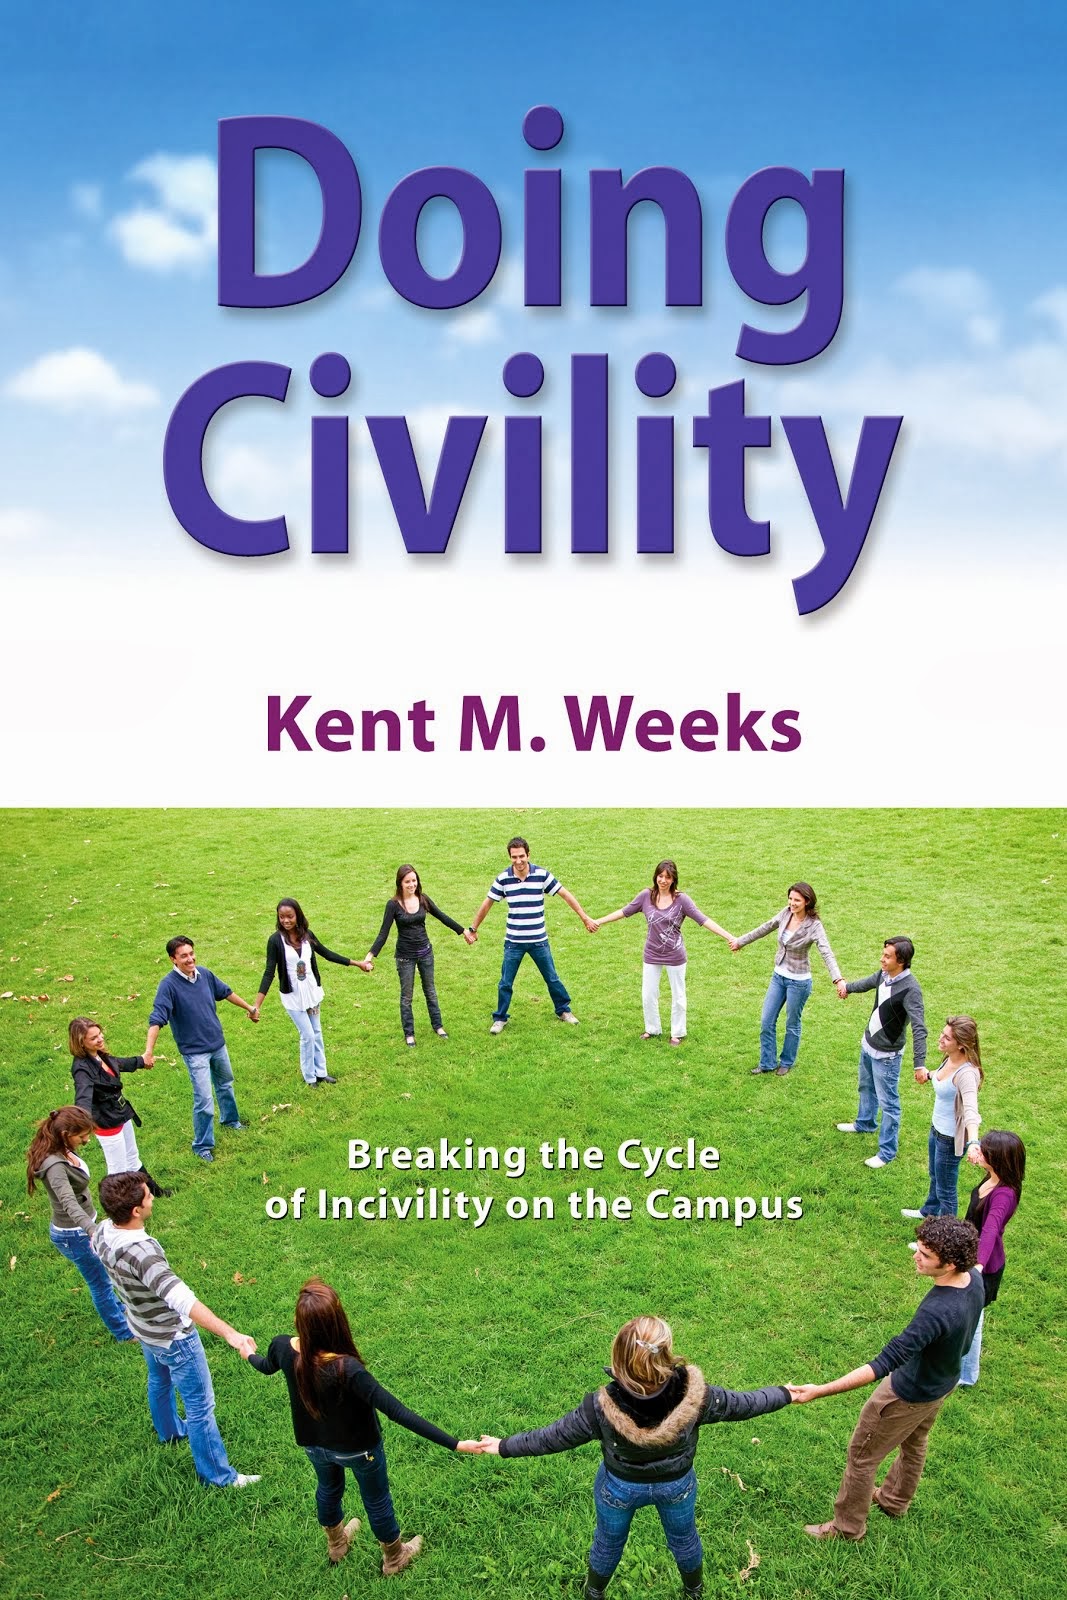 New Book from College Civility